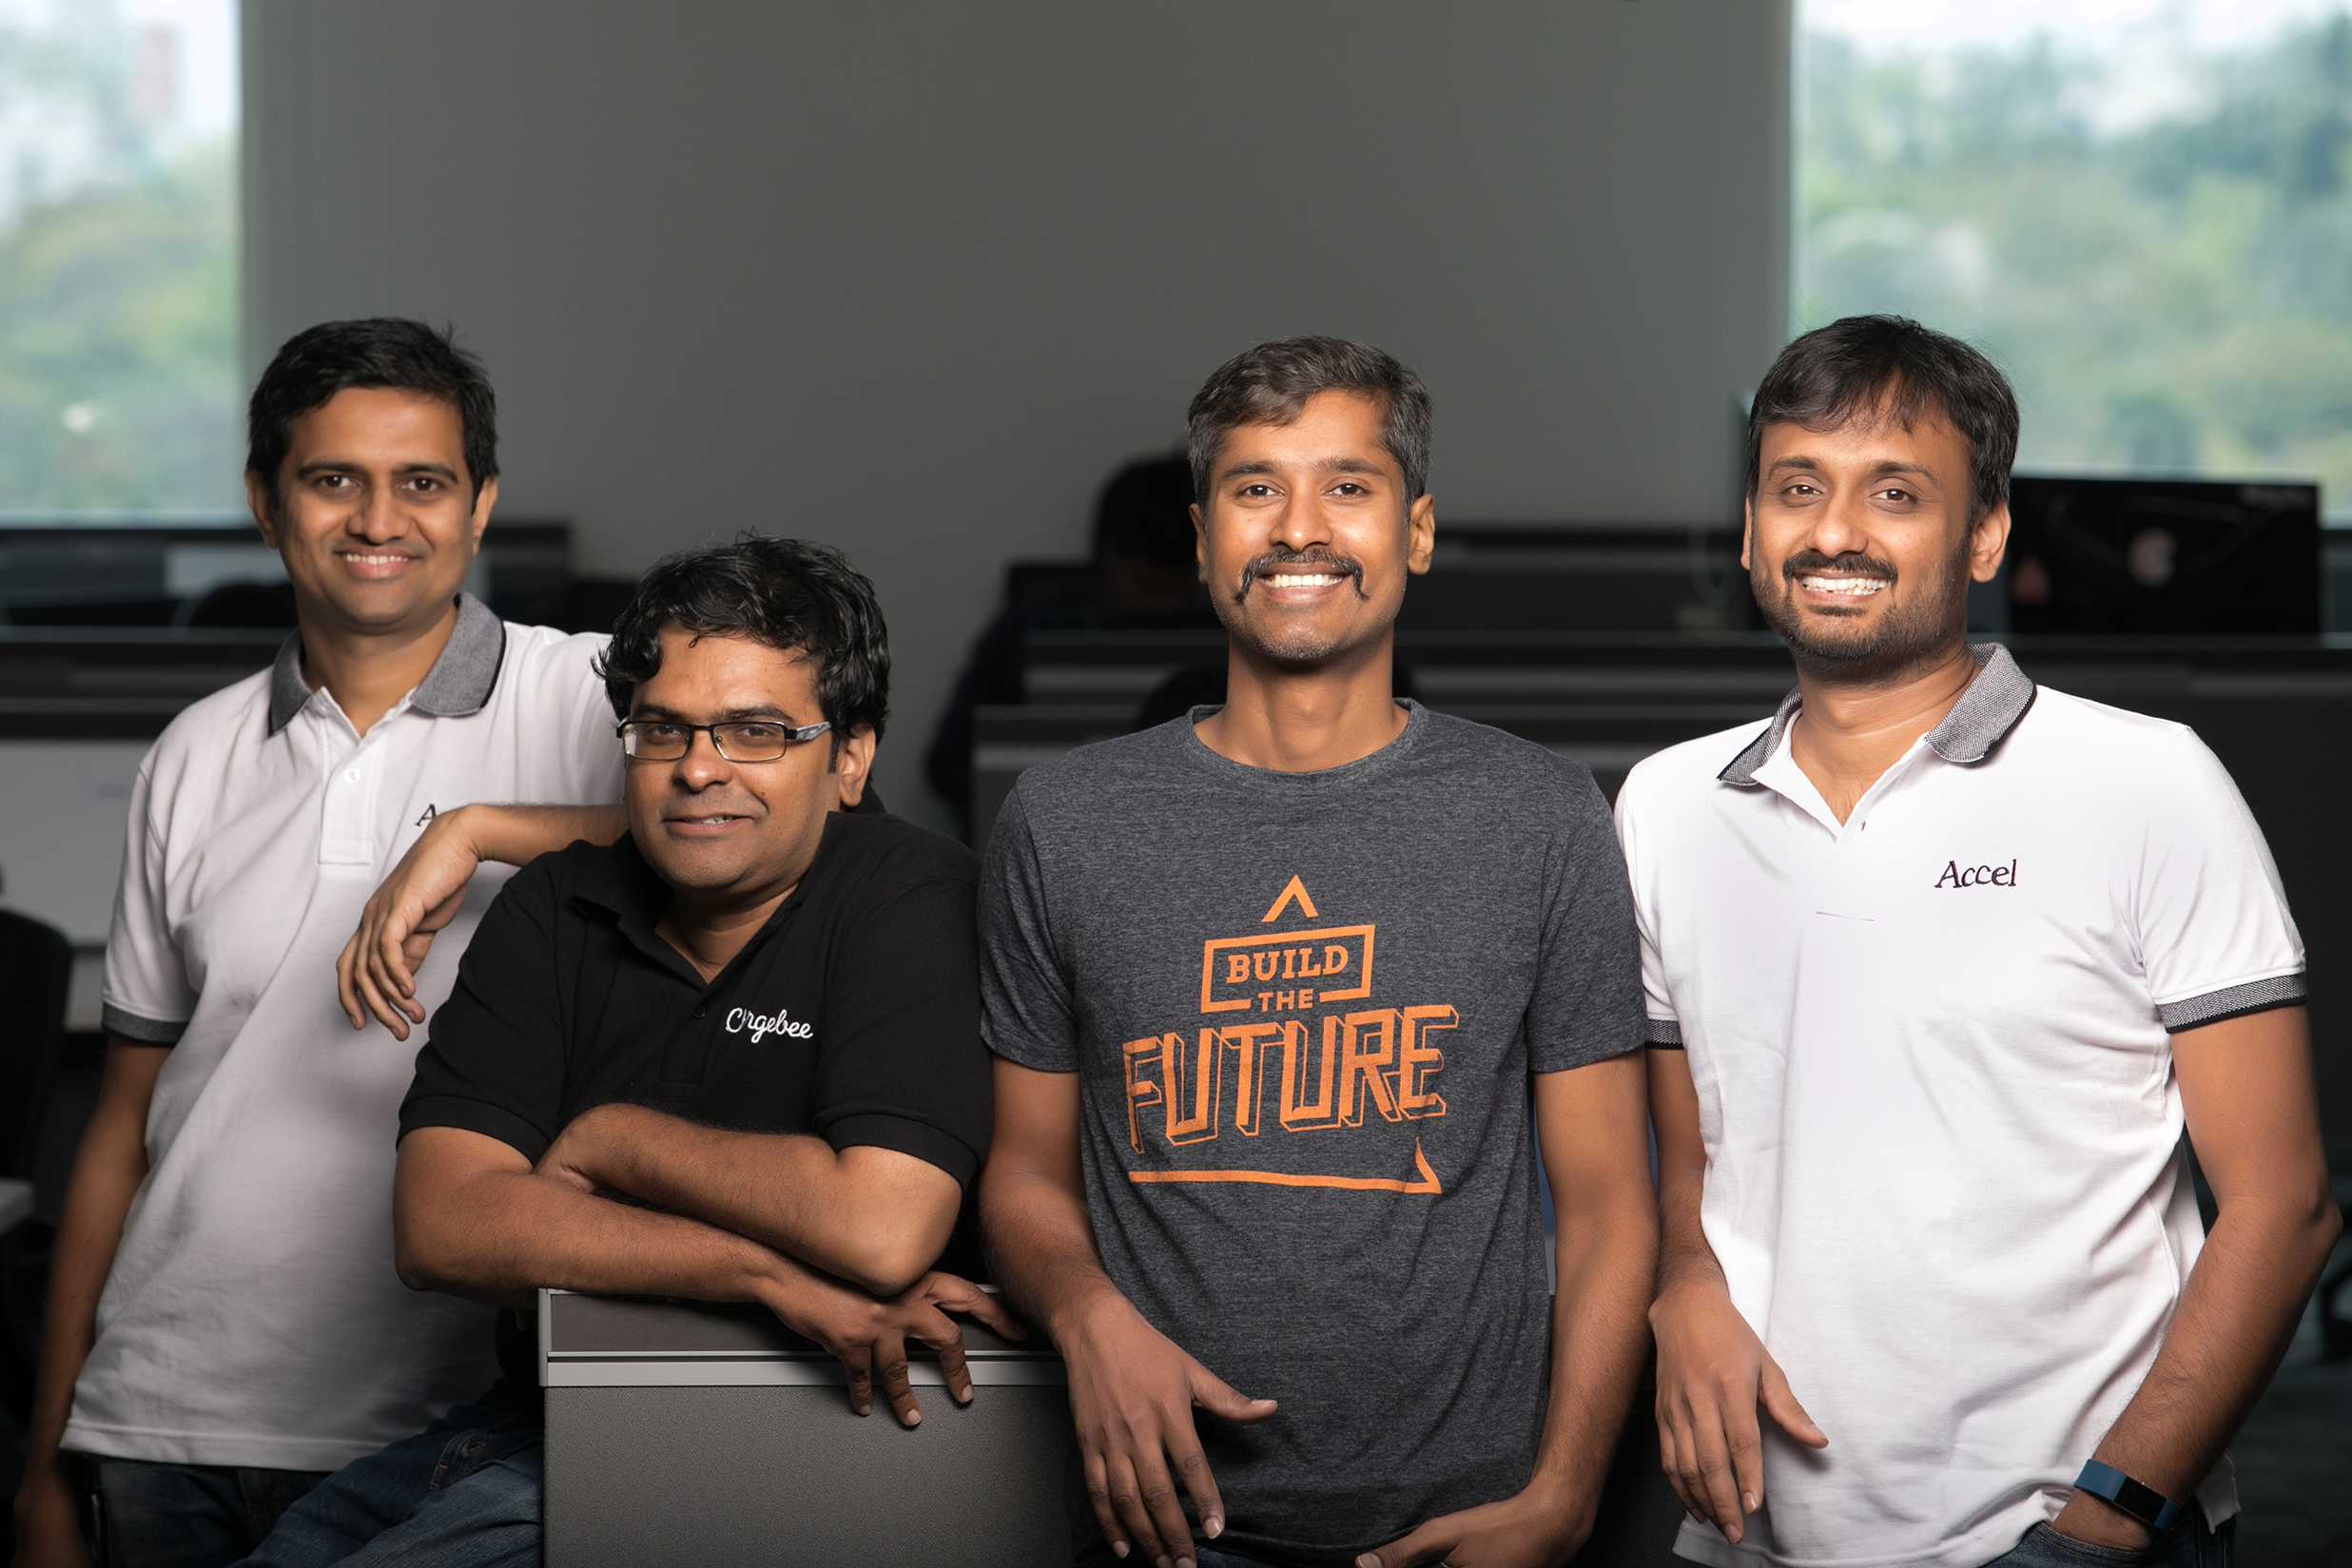 India adds one more unicorn as subscription billing platform Chargebee raises USD 125 million Series G